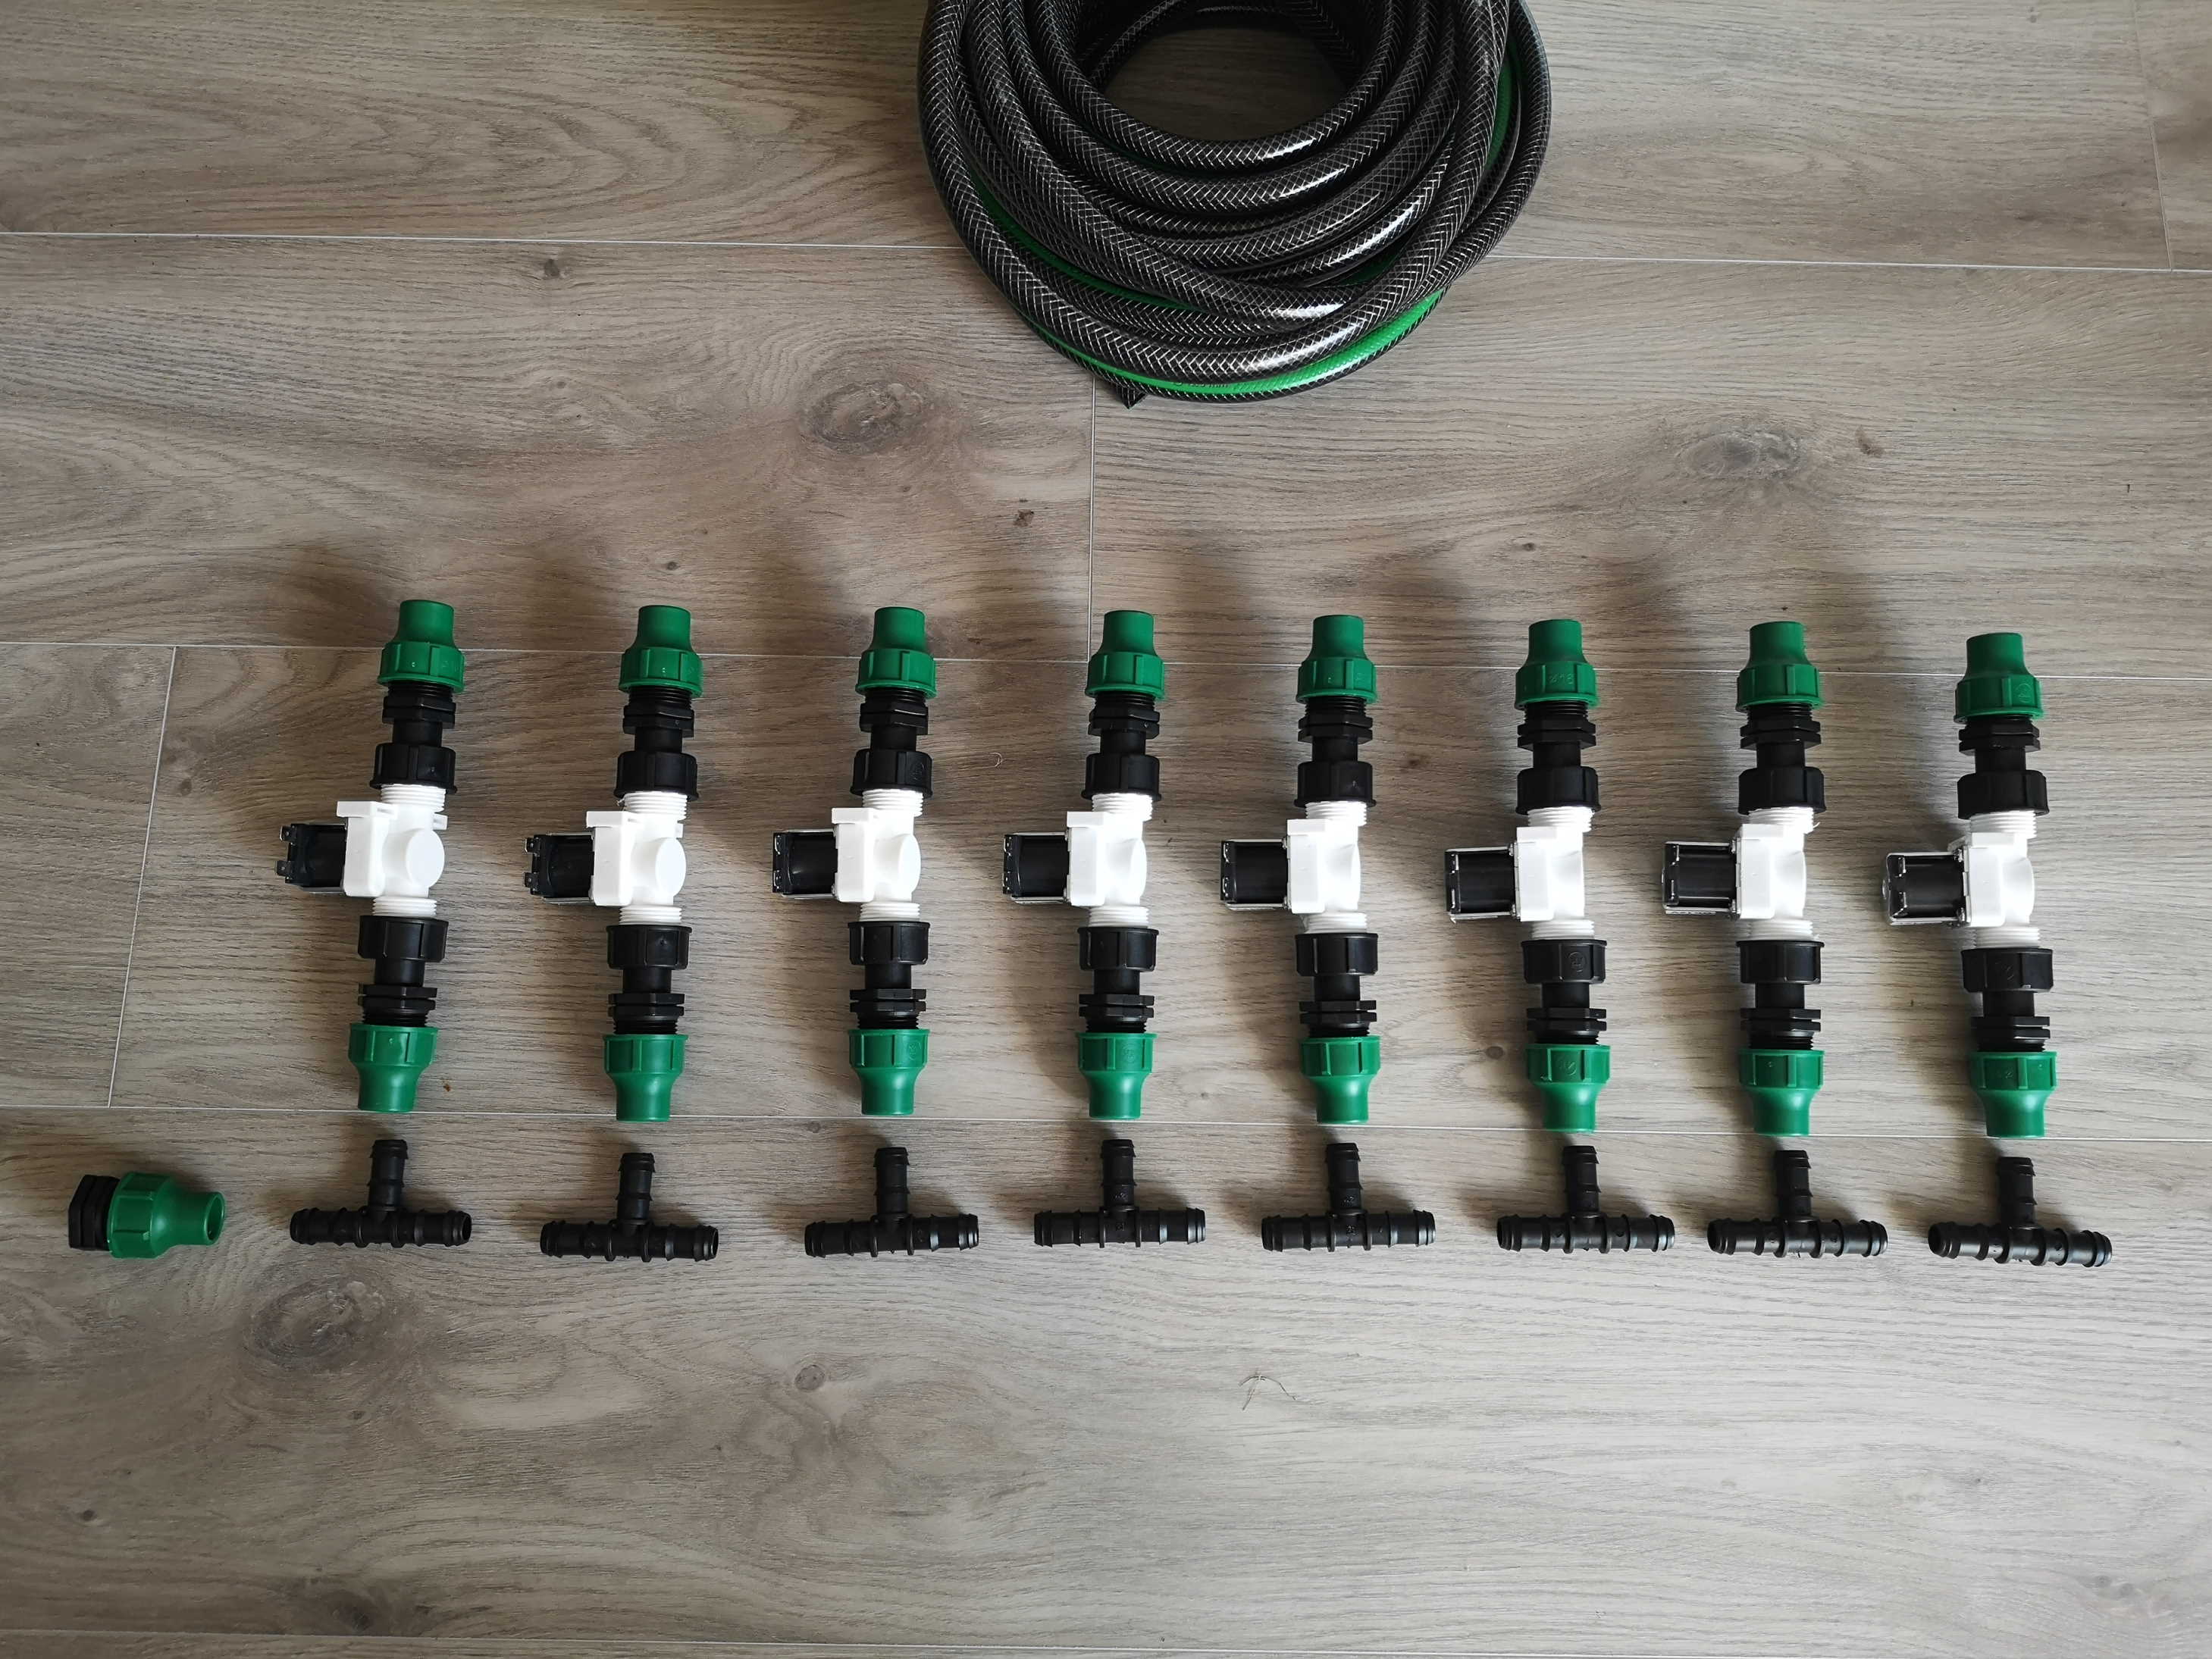 4-all_valves_about_to_connect